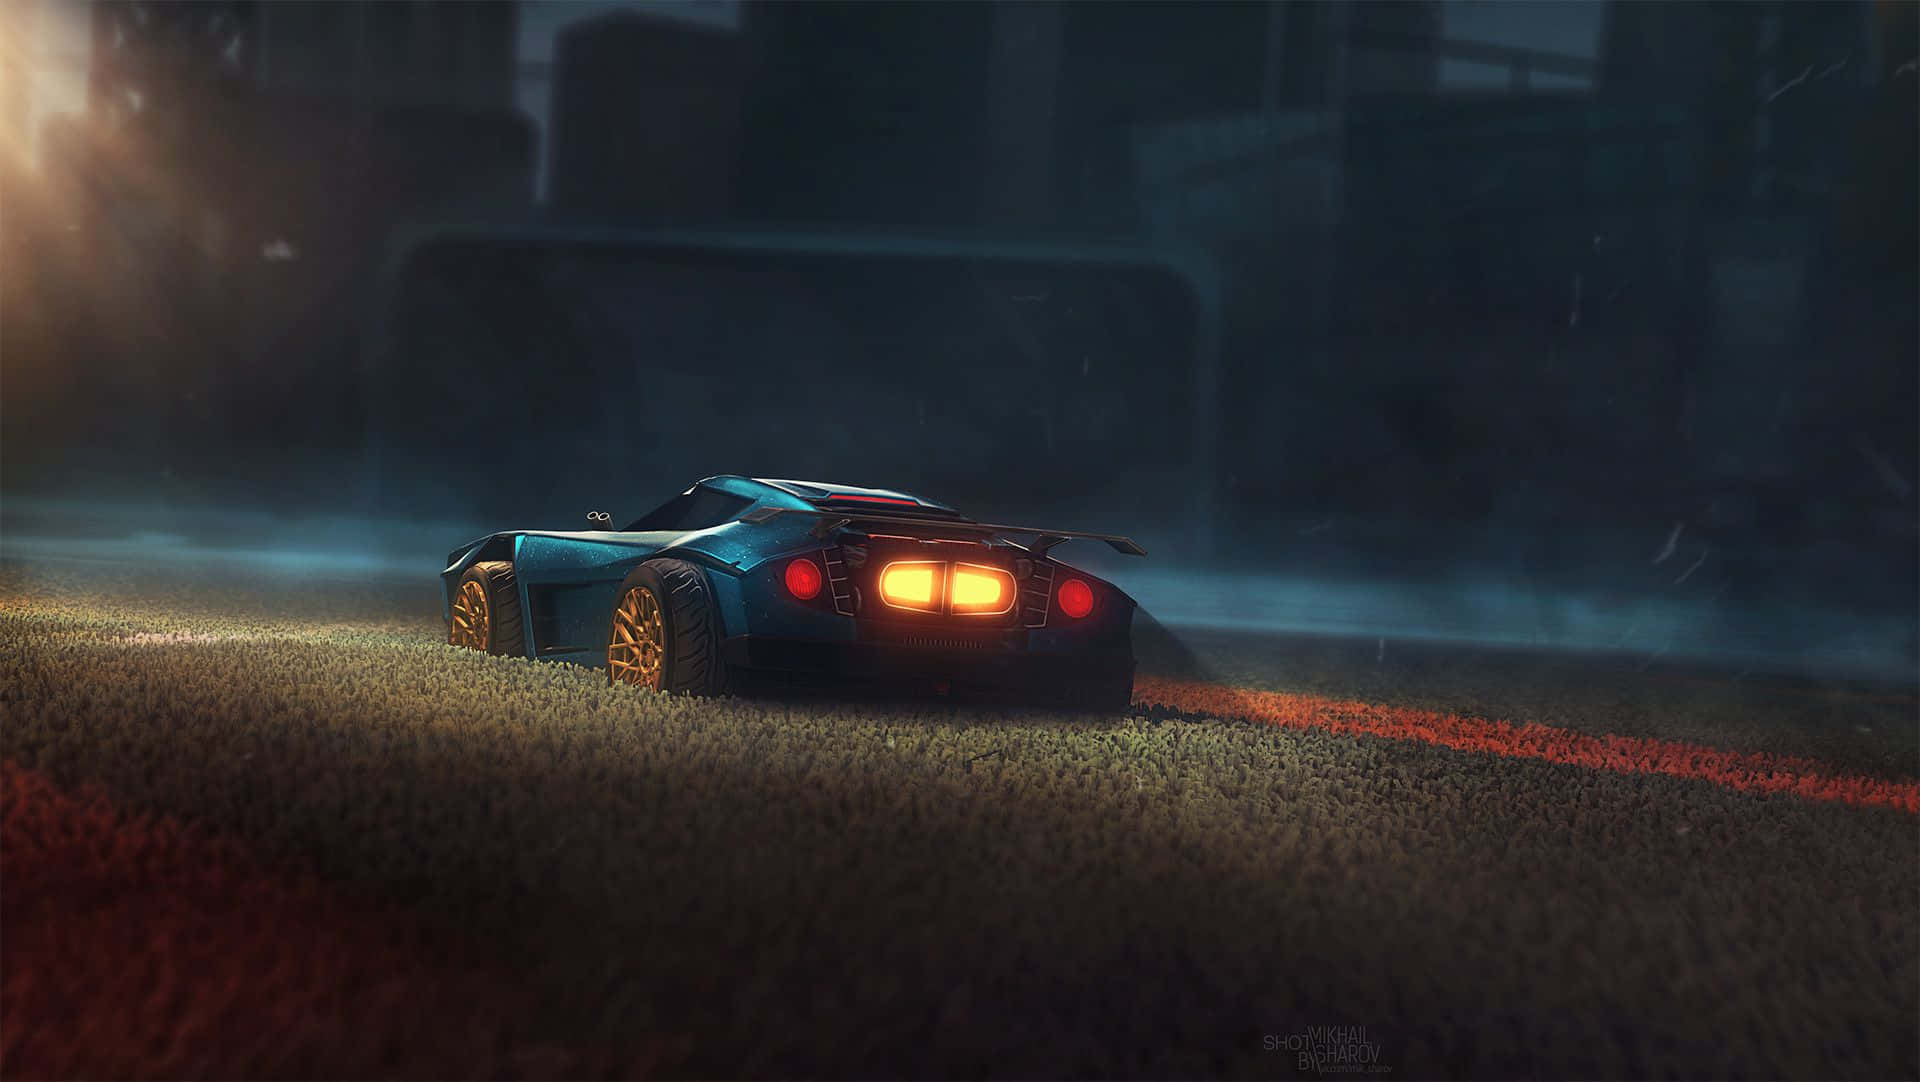 Image Ready For Launch: A Gamer Flies Through An Off-road Track In Rocket League